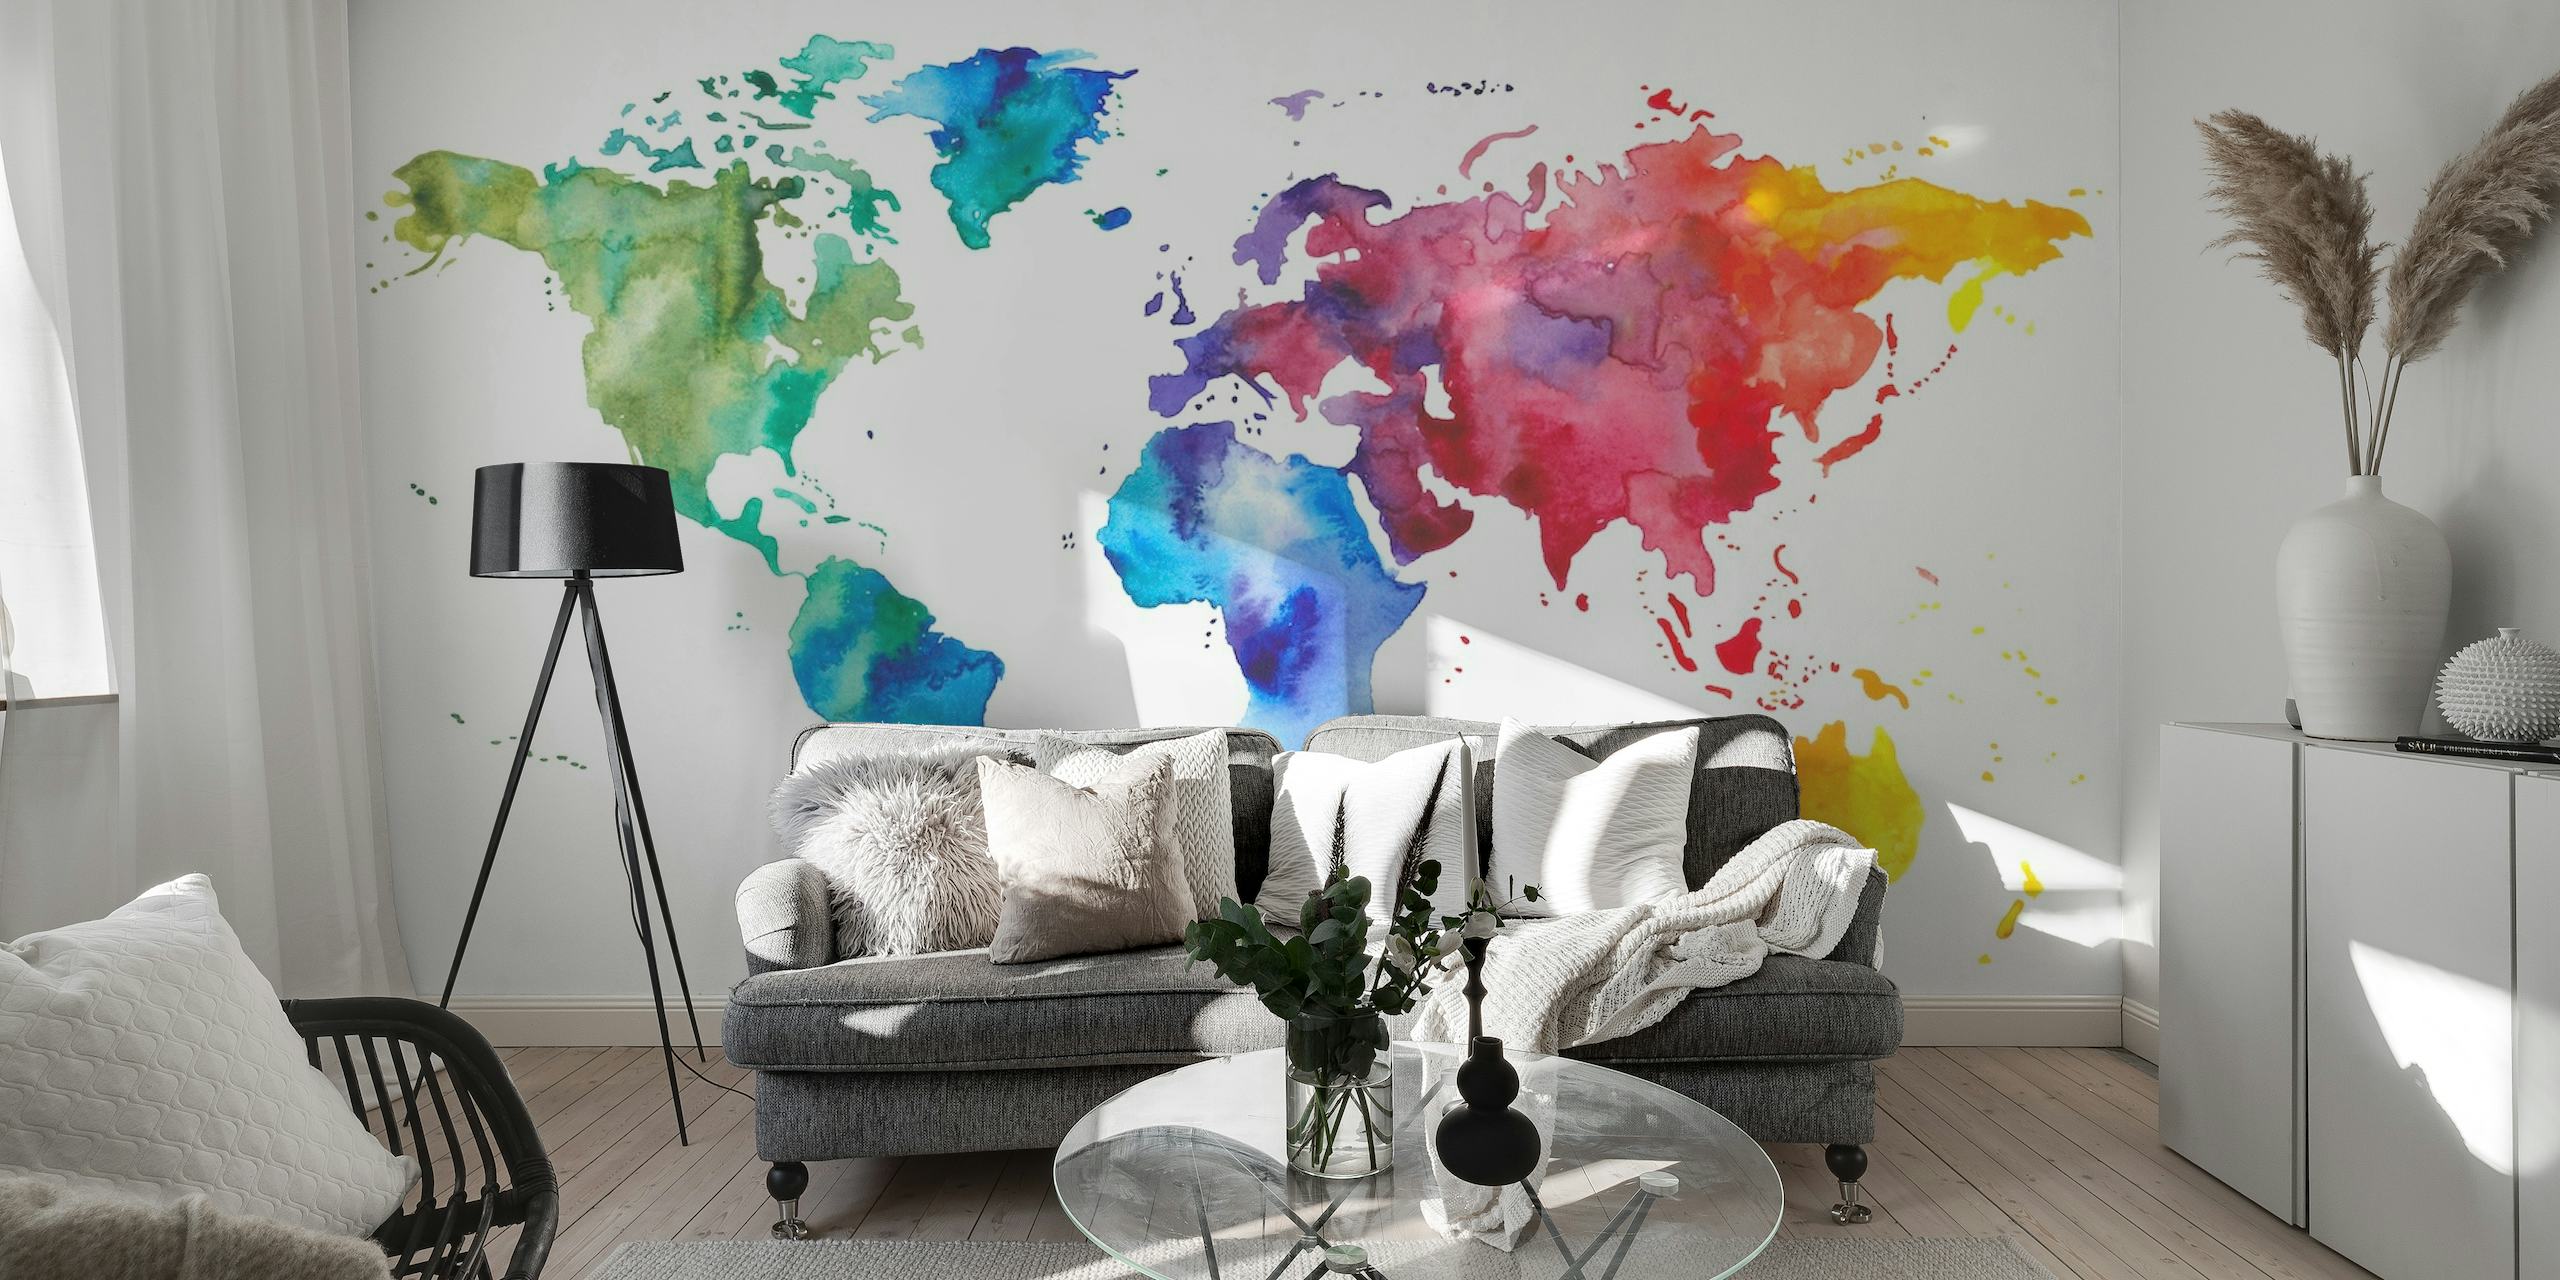 Painted world map behang